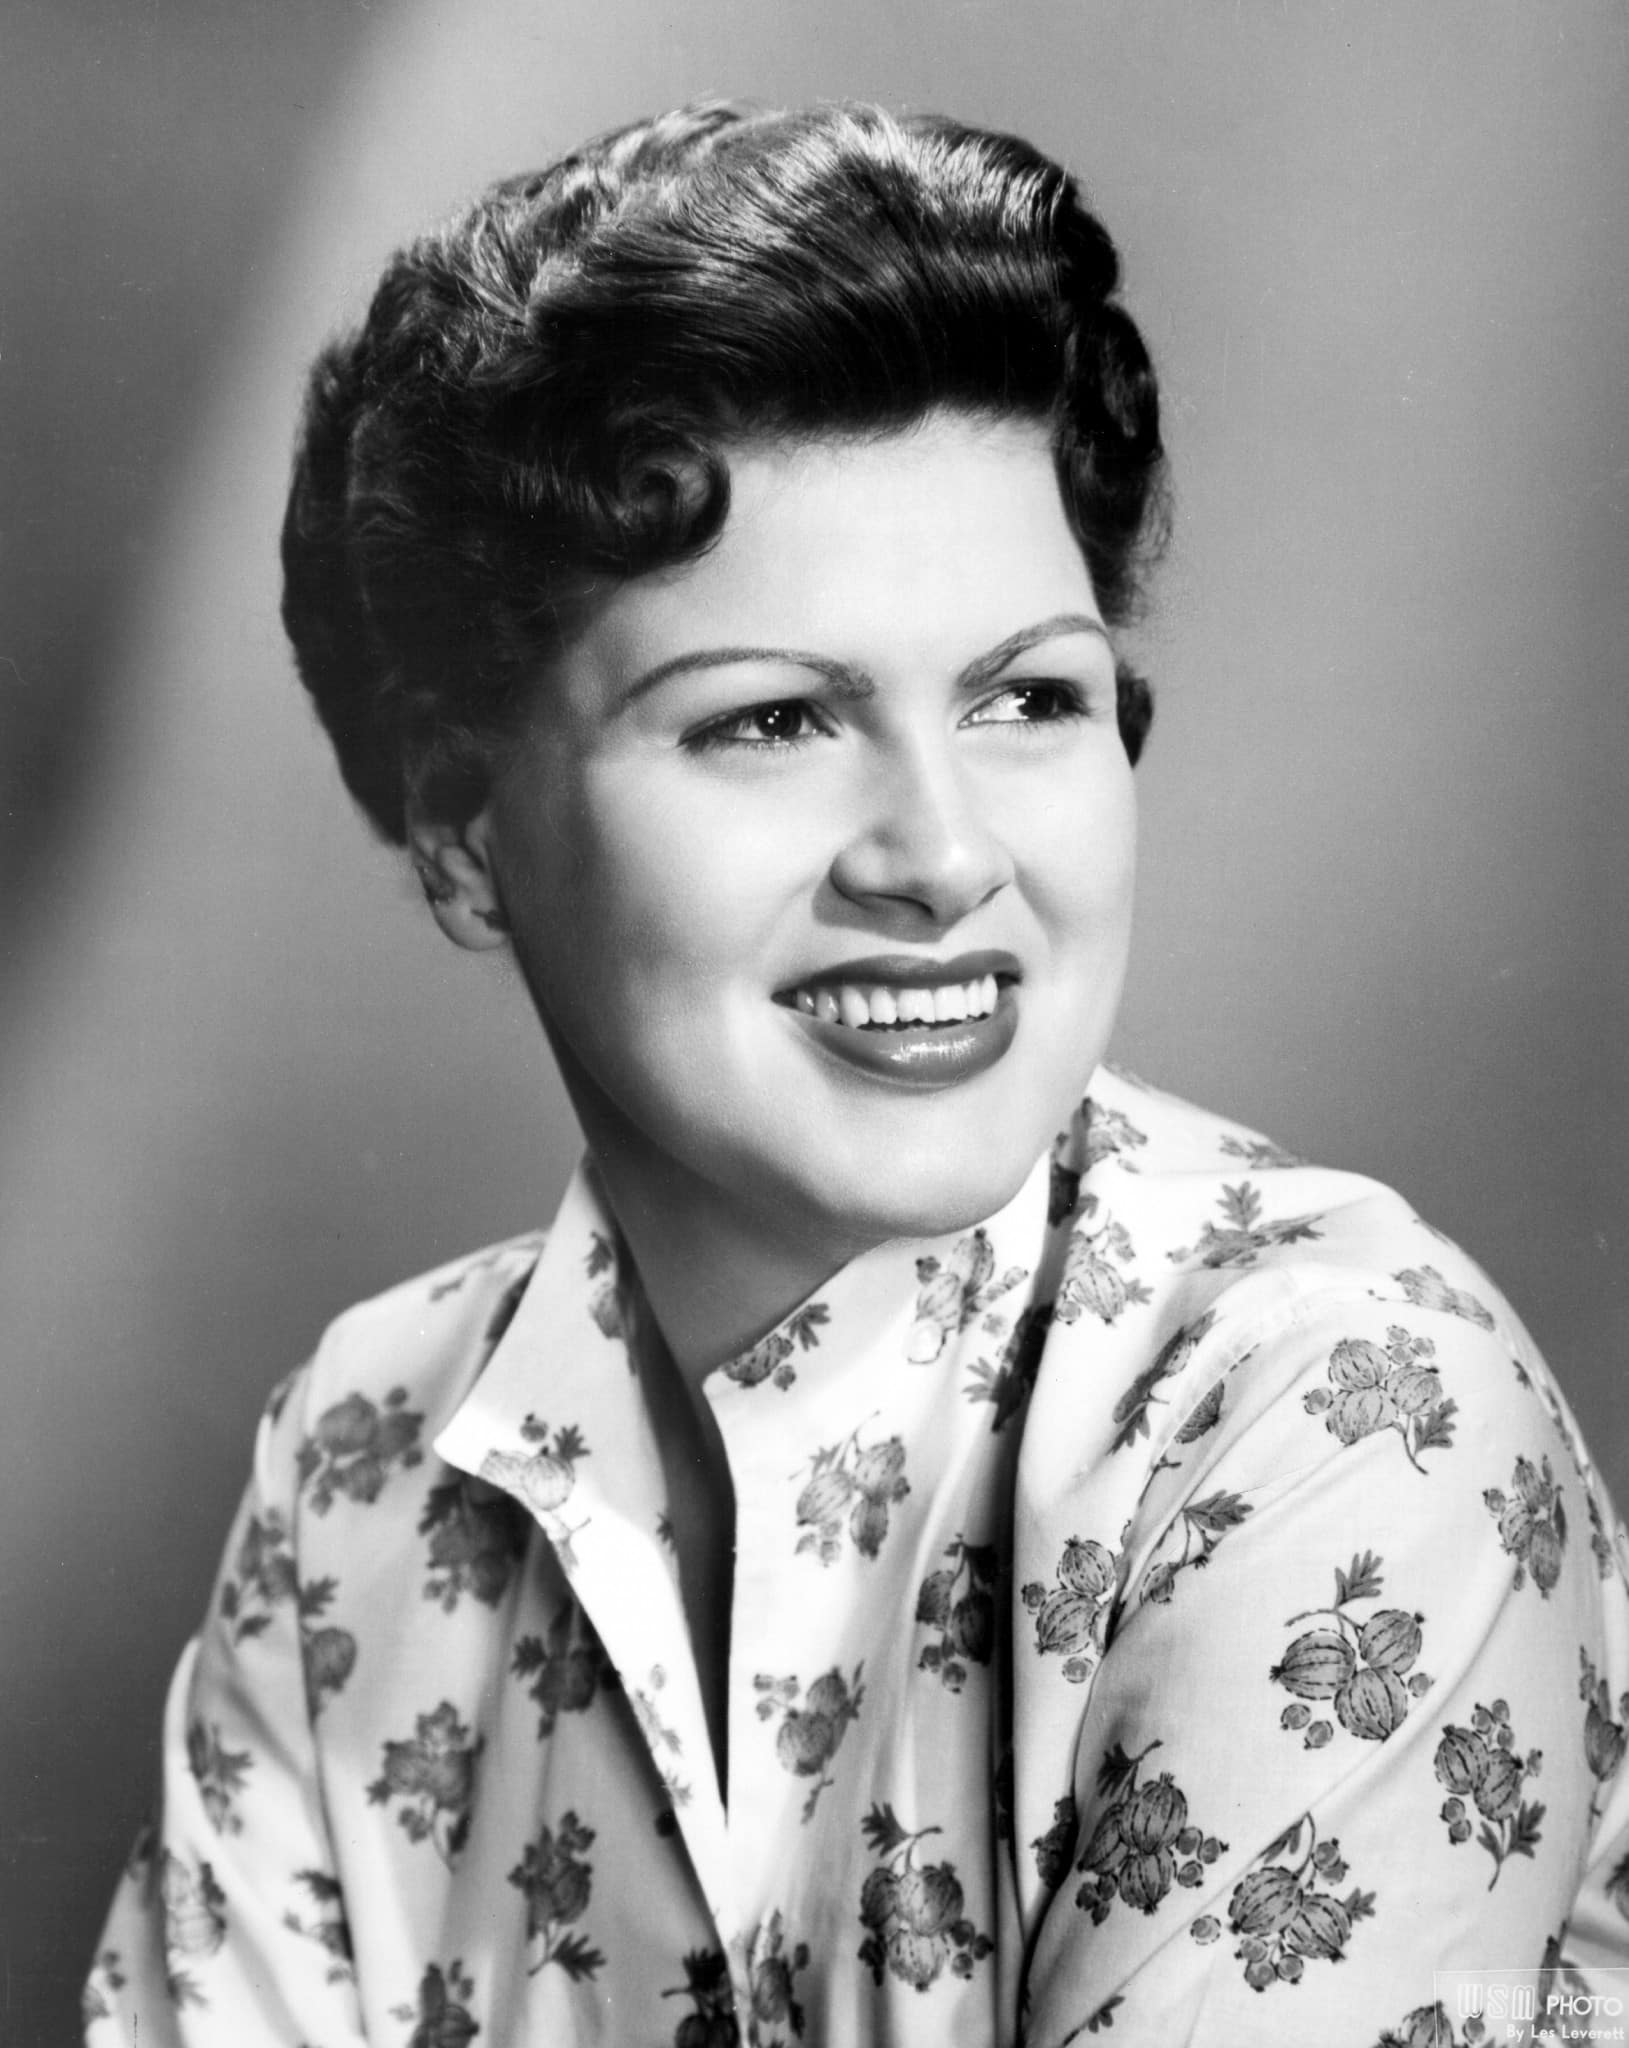 Patsy Cline reached #1 with her song "She's Got You"